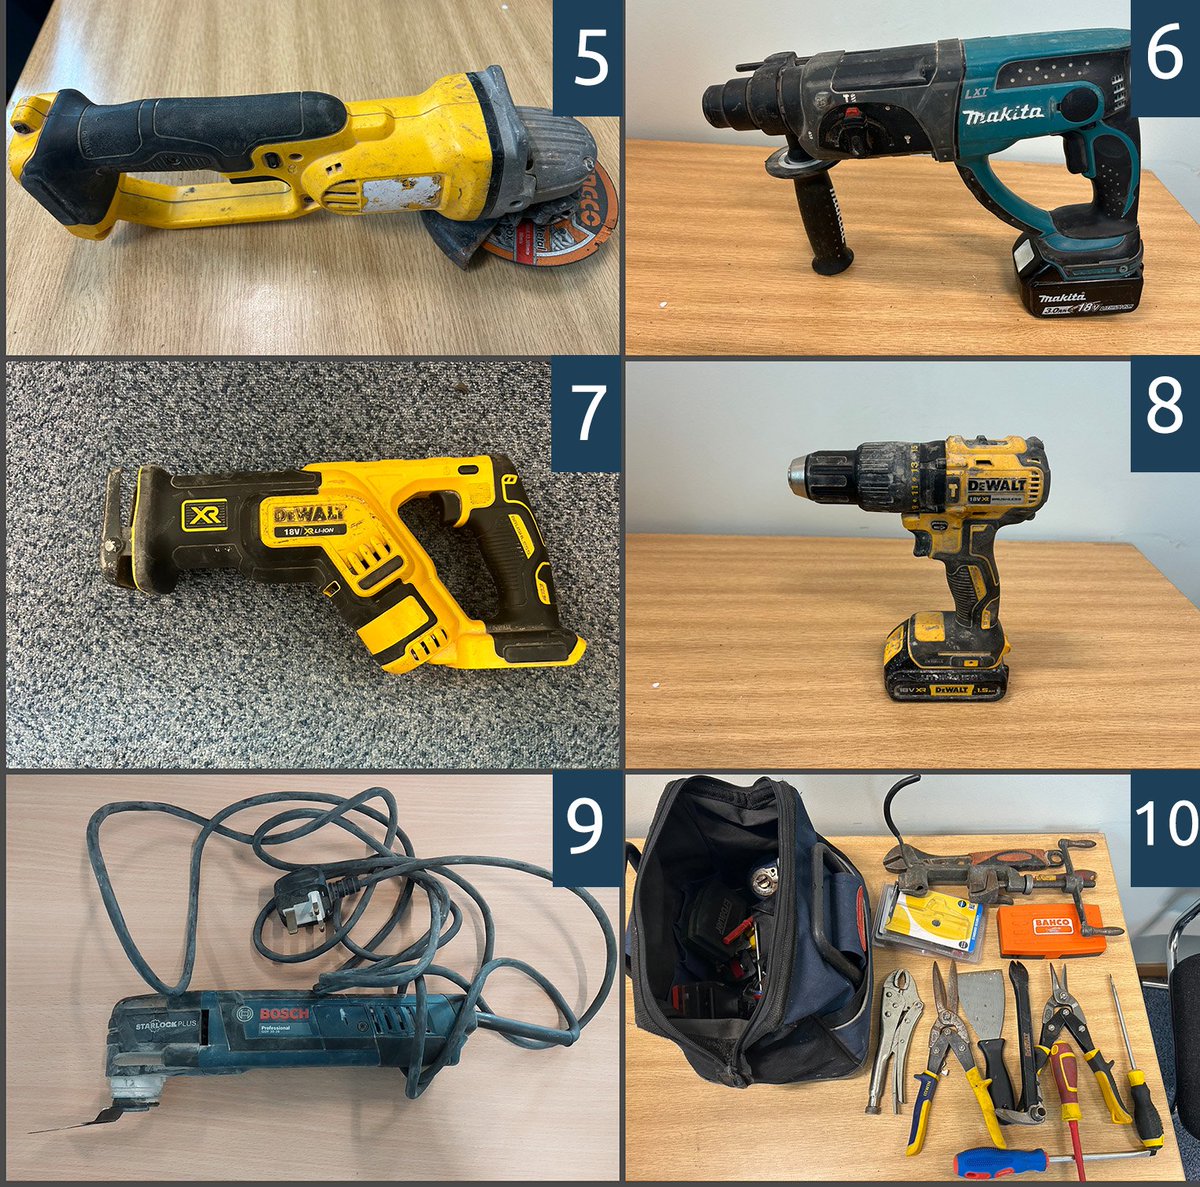 #Appeal | Tools found in Derby | Reference: 24*162958 We have released several images of tools that have been recovered and we are wanting to reunite them with their rightful owners. Read more here: orlo.uk/Ui8w7